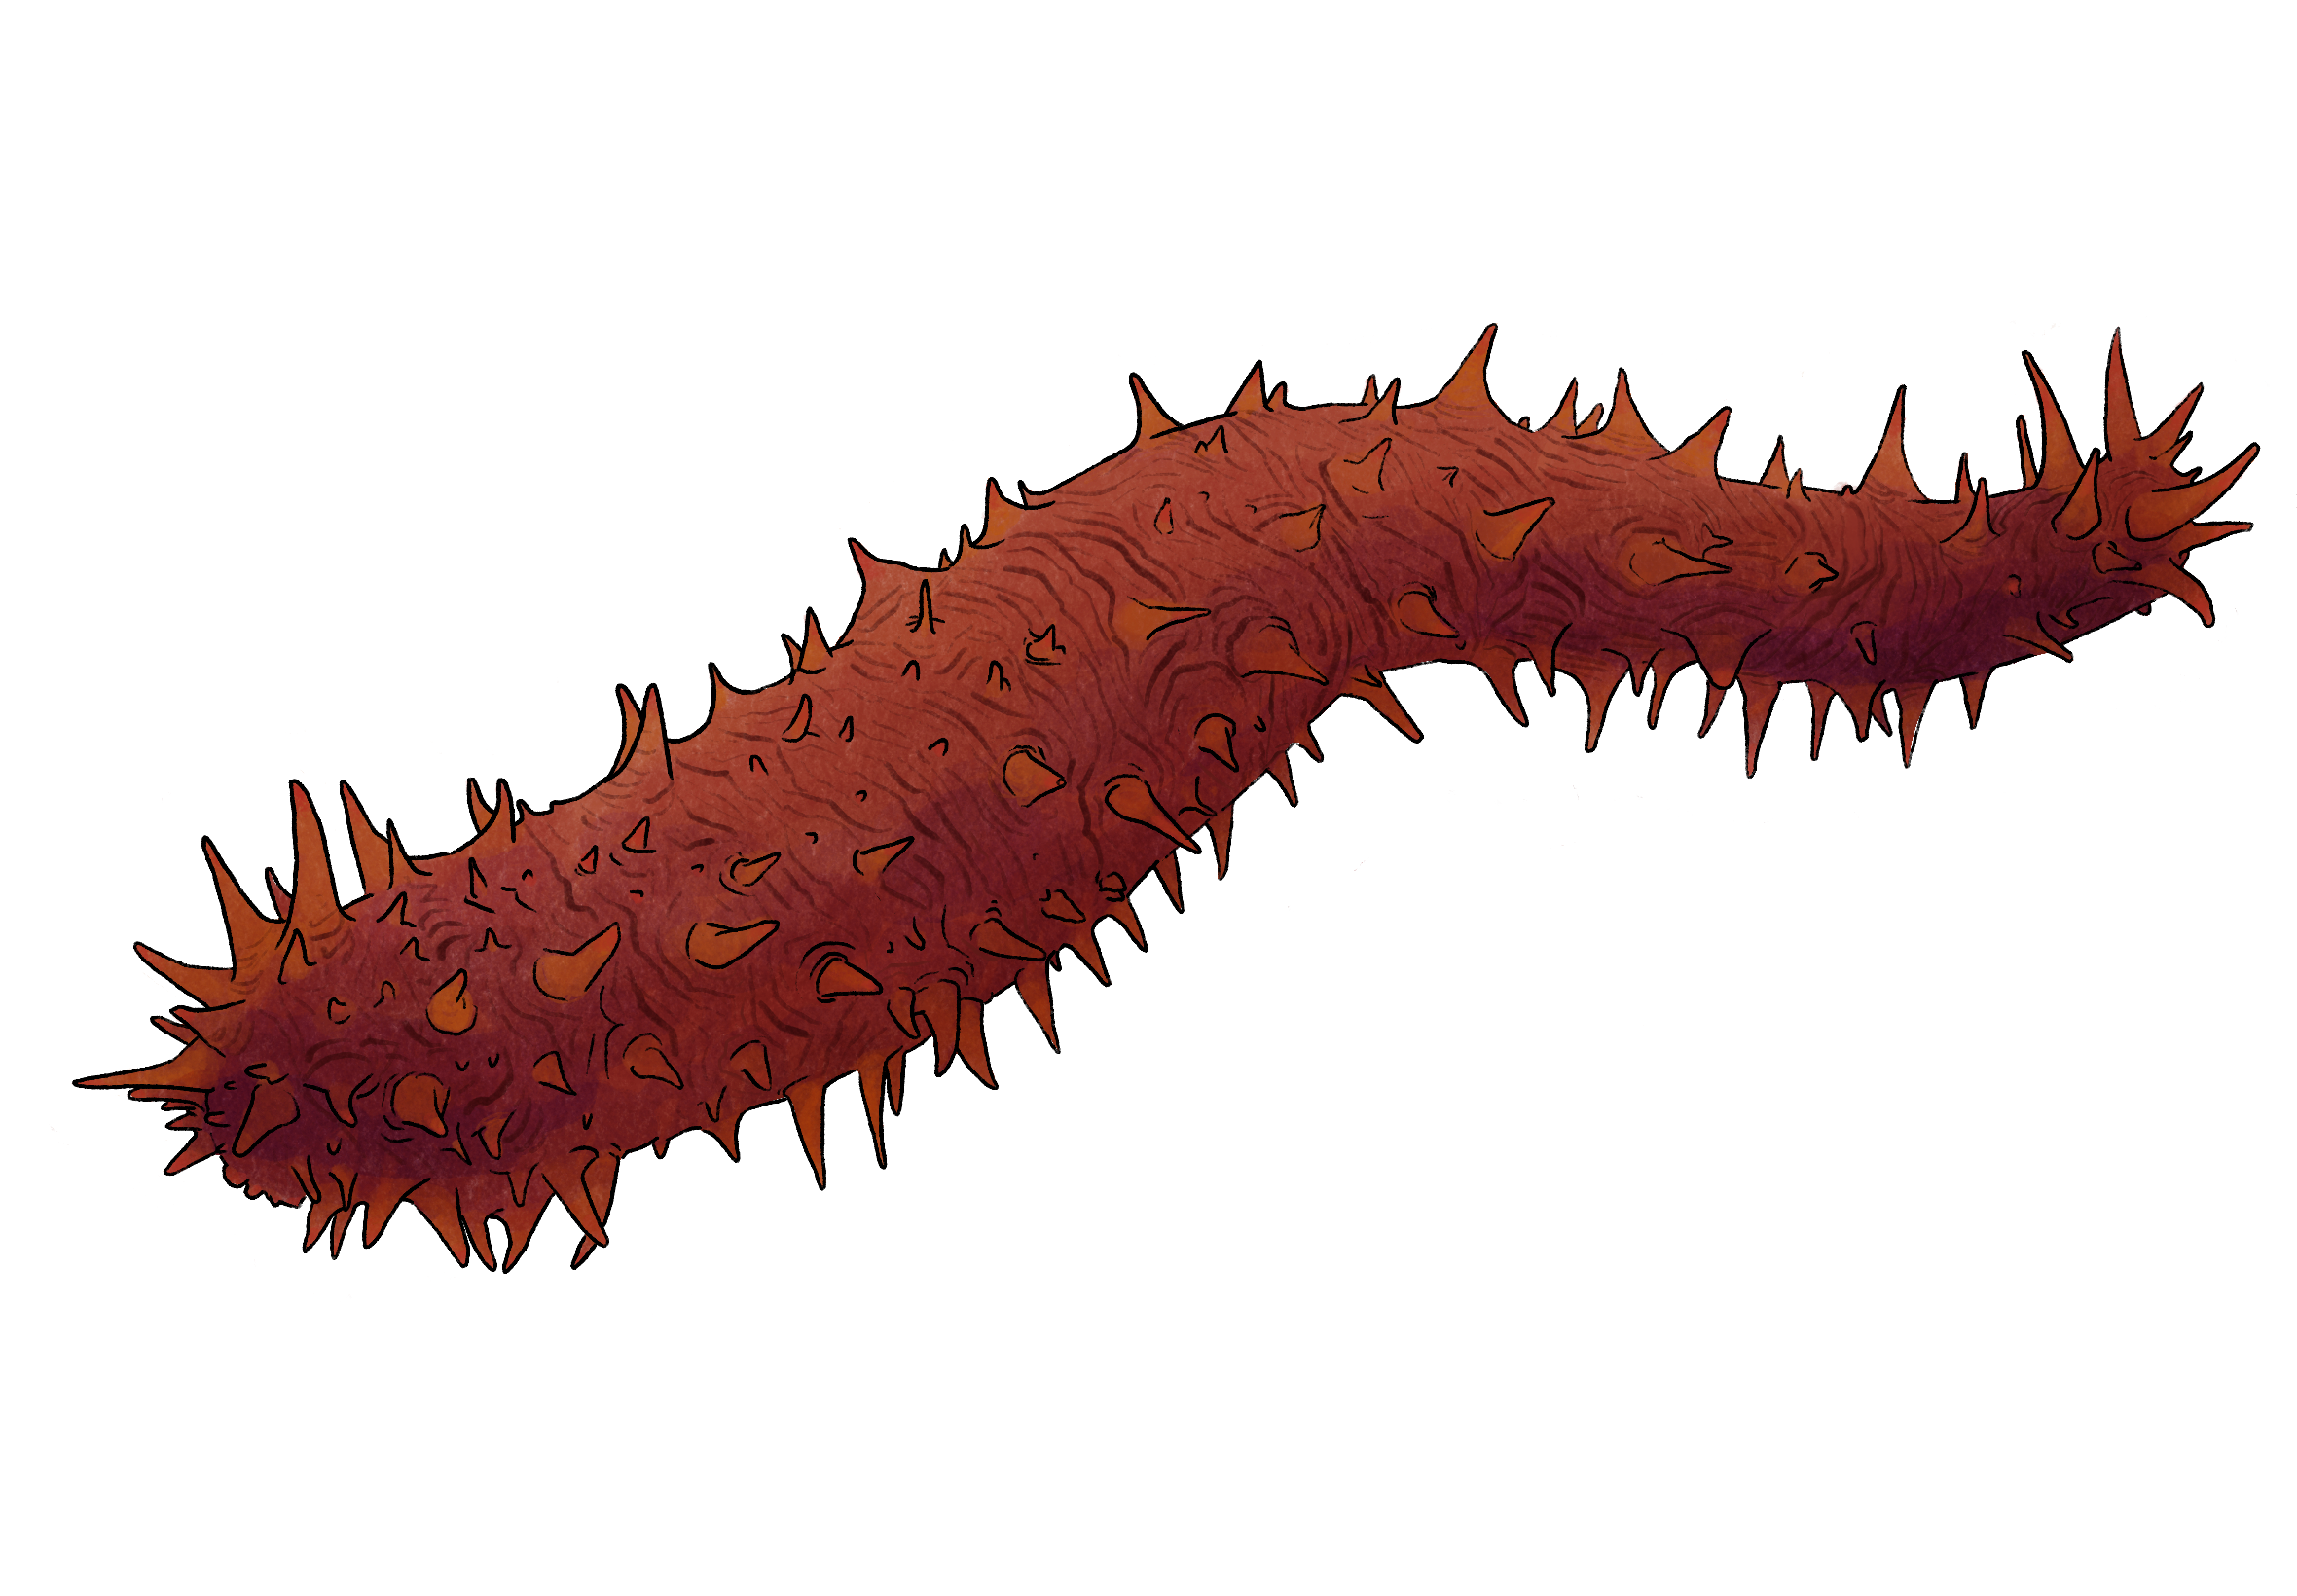 Giant California sea cucumber - Illustrated by Lilly Crosby